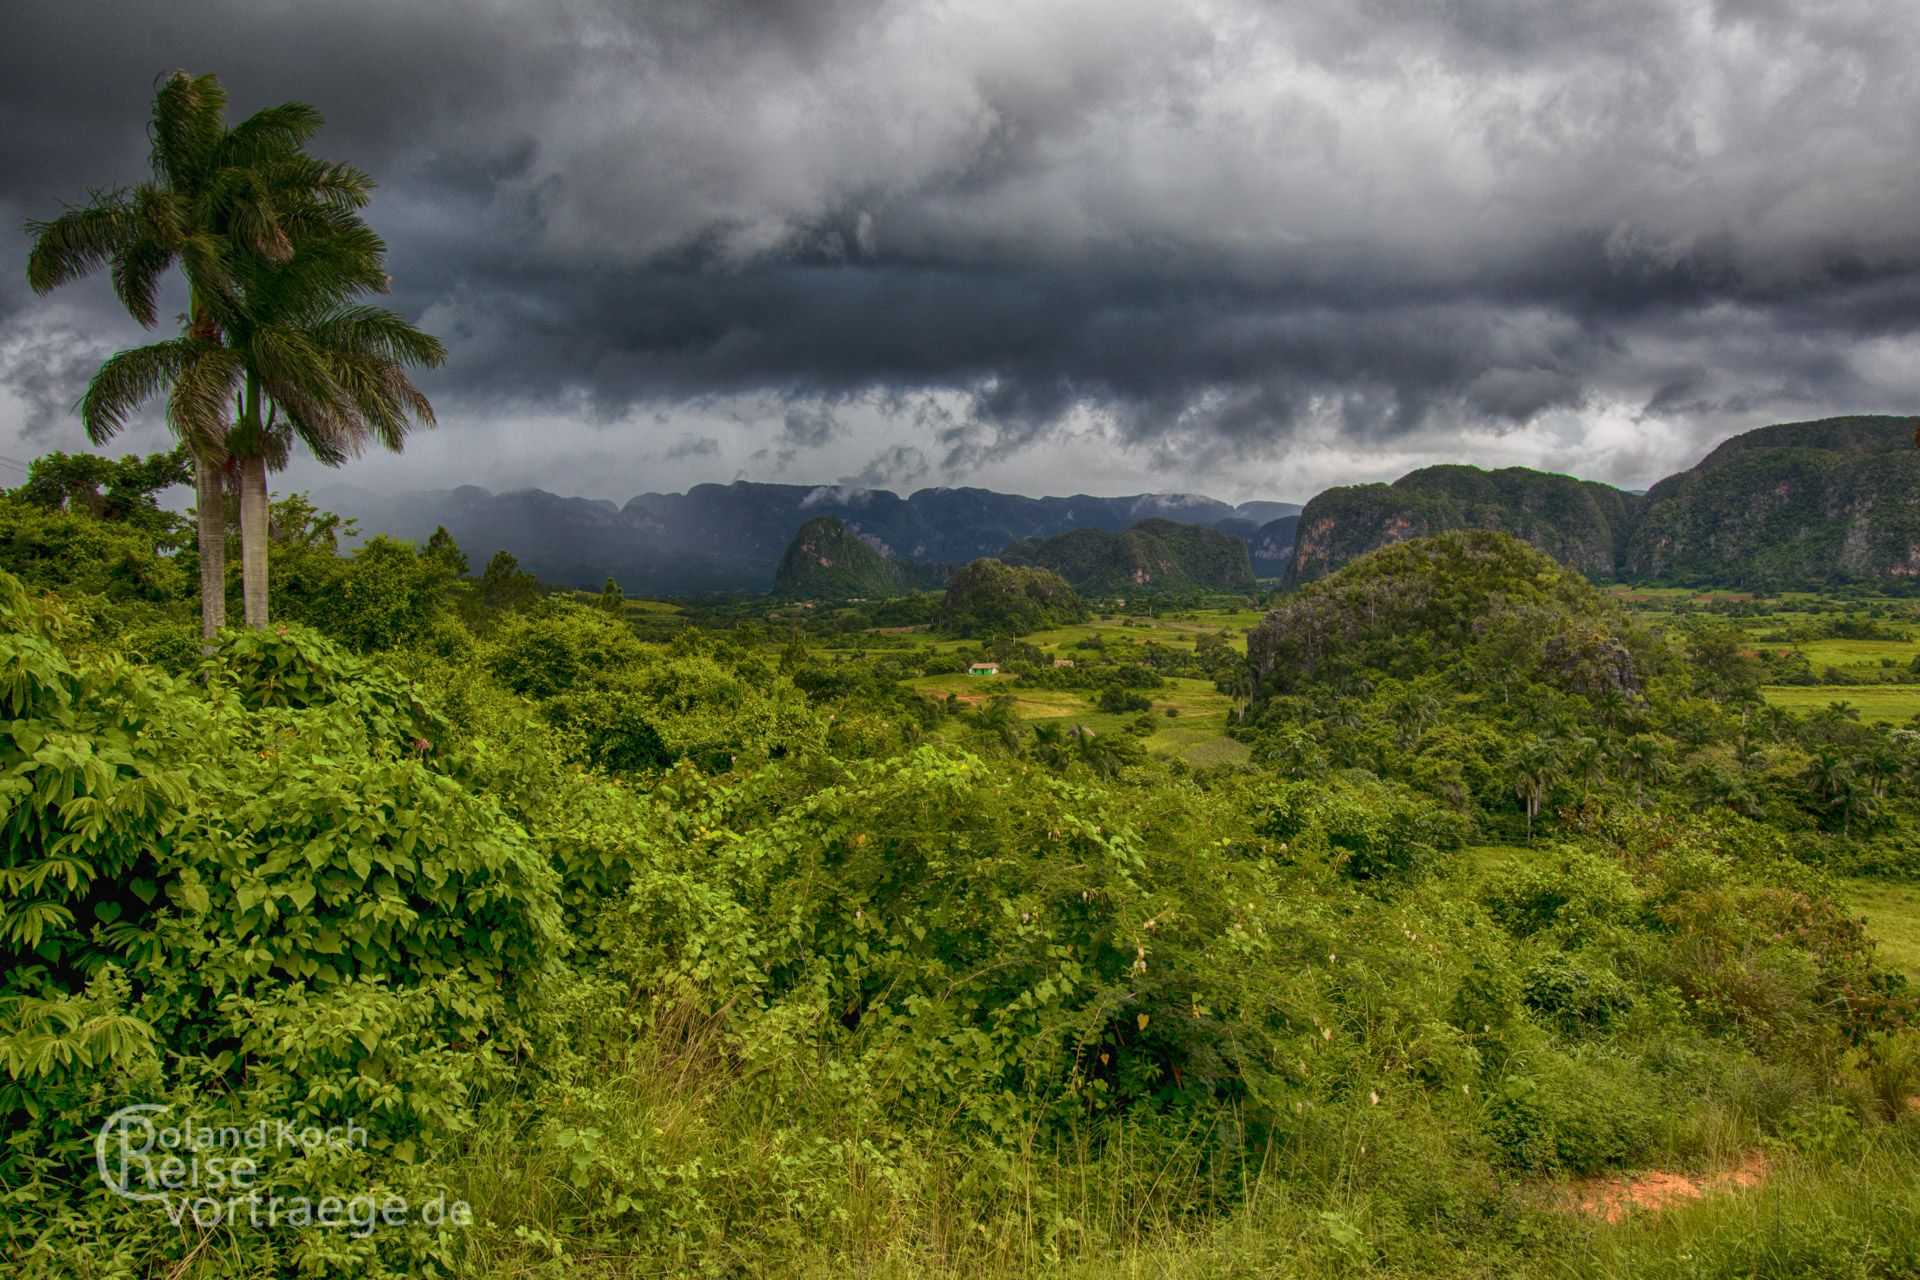 Cuba, Vinales, Panoramic view over Vinales with a thunderstorm